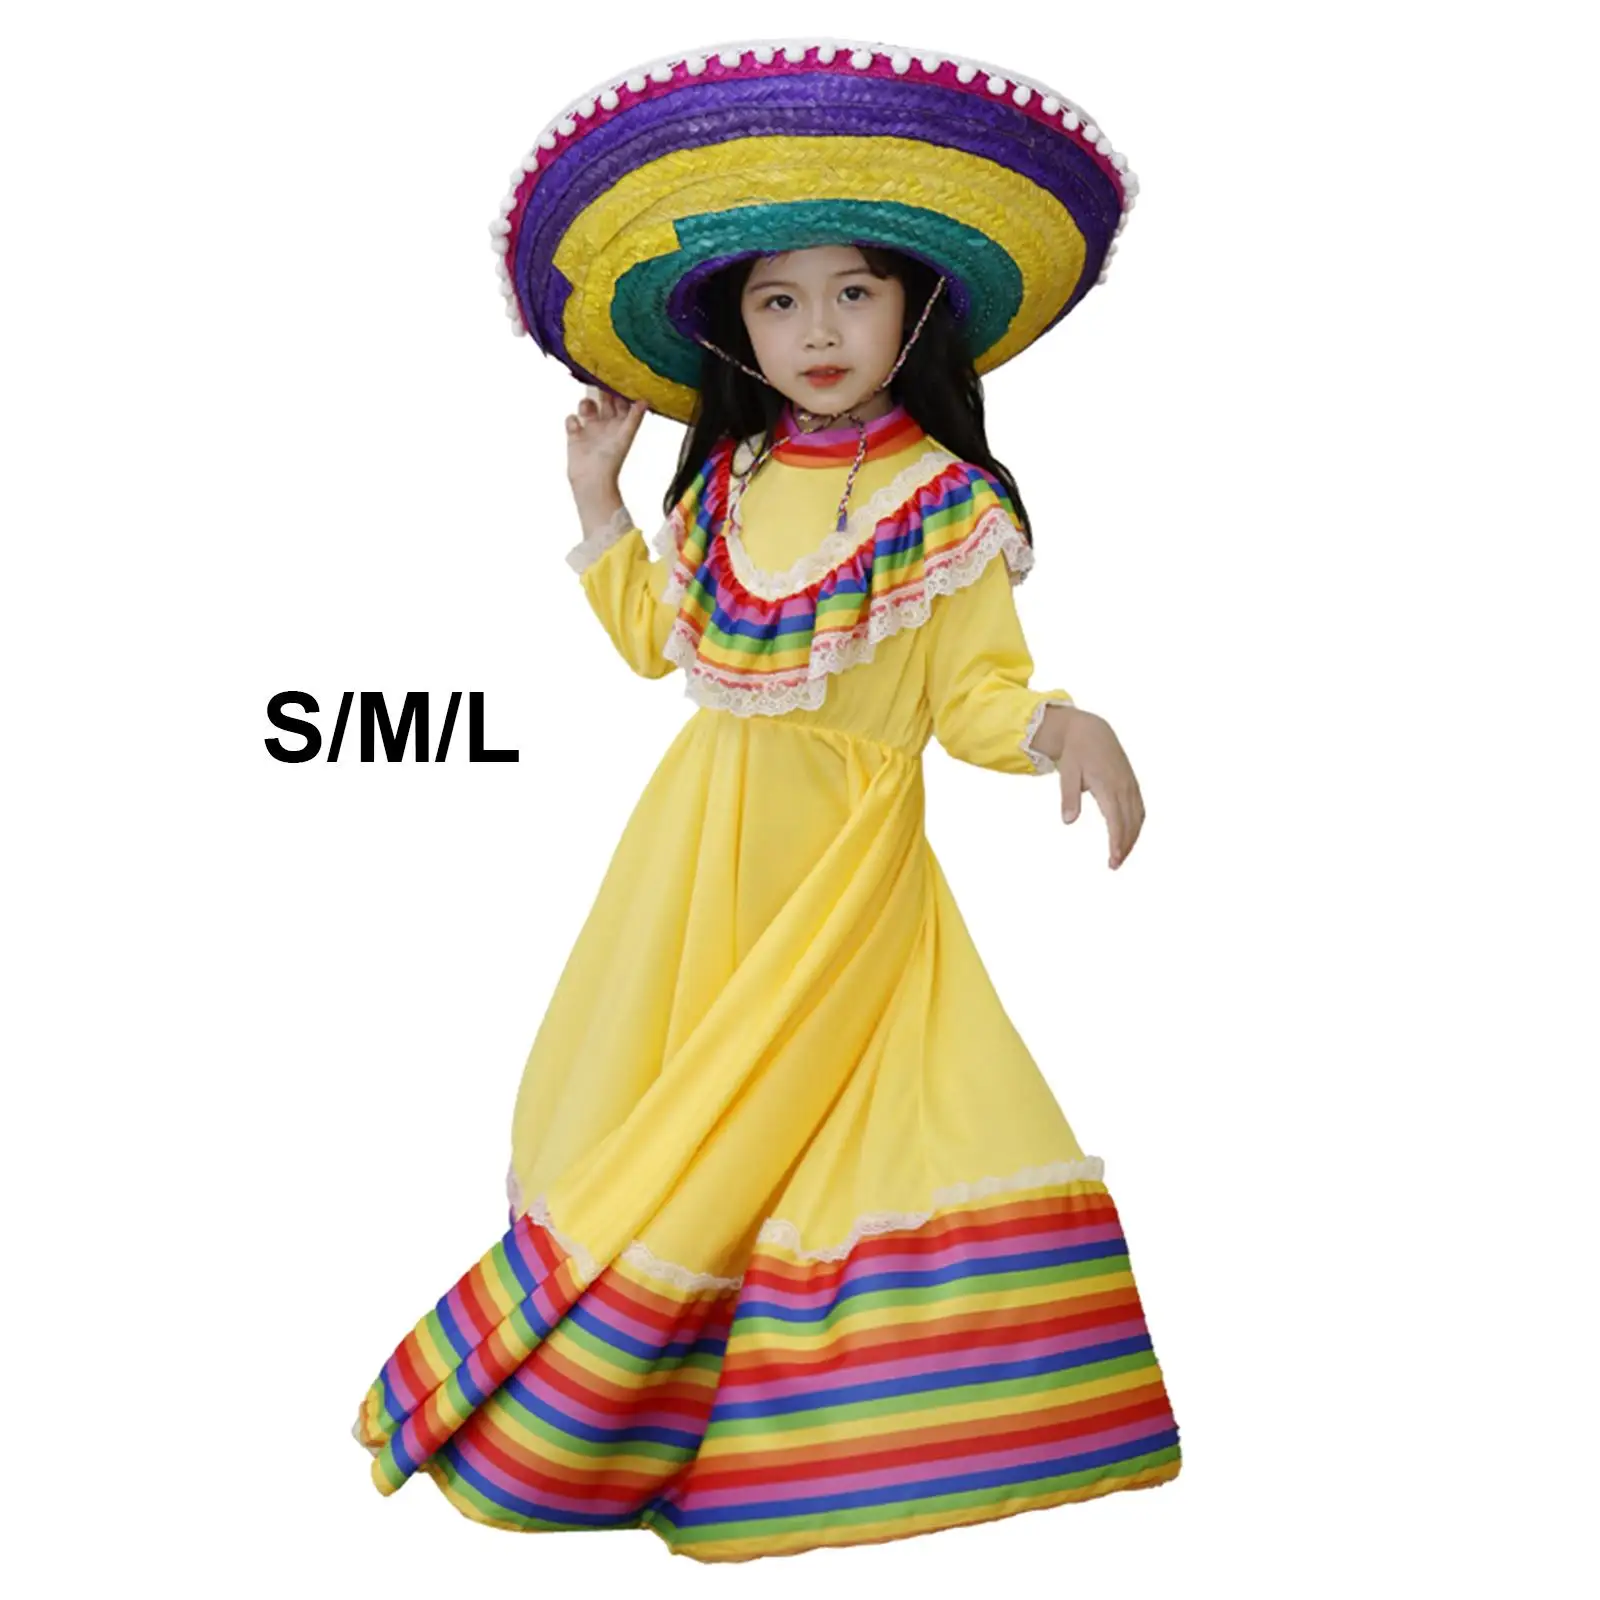 High Quality Little Girls Mexican Dress Birthday Party Halloween Costume Kids Child Mexican Dance Dress